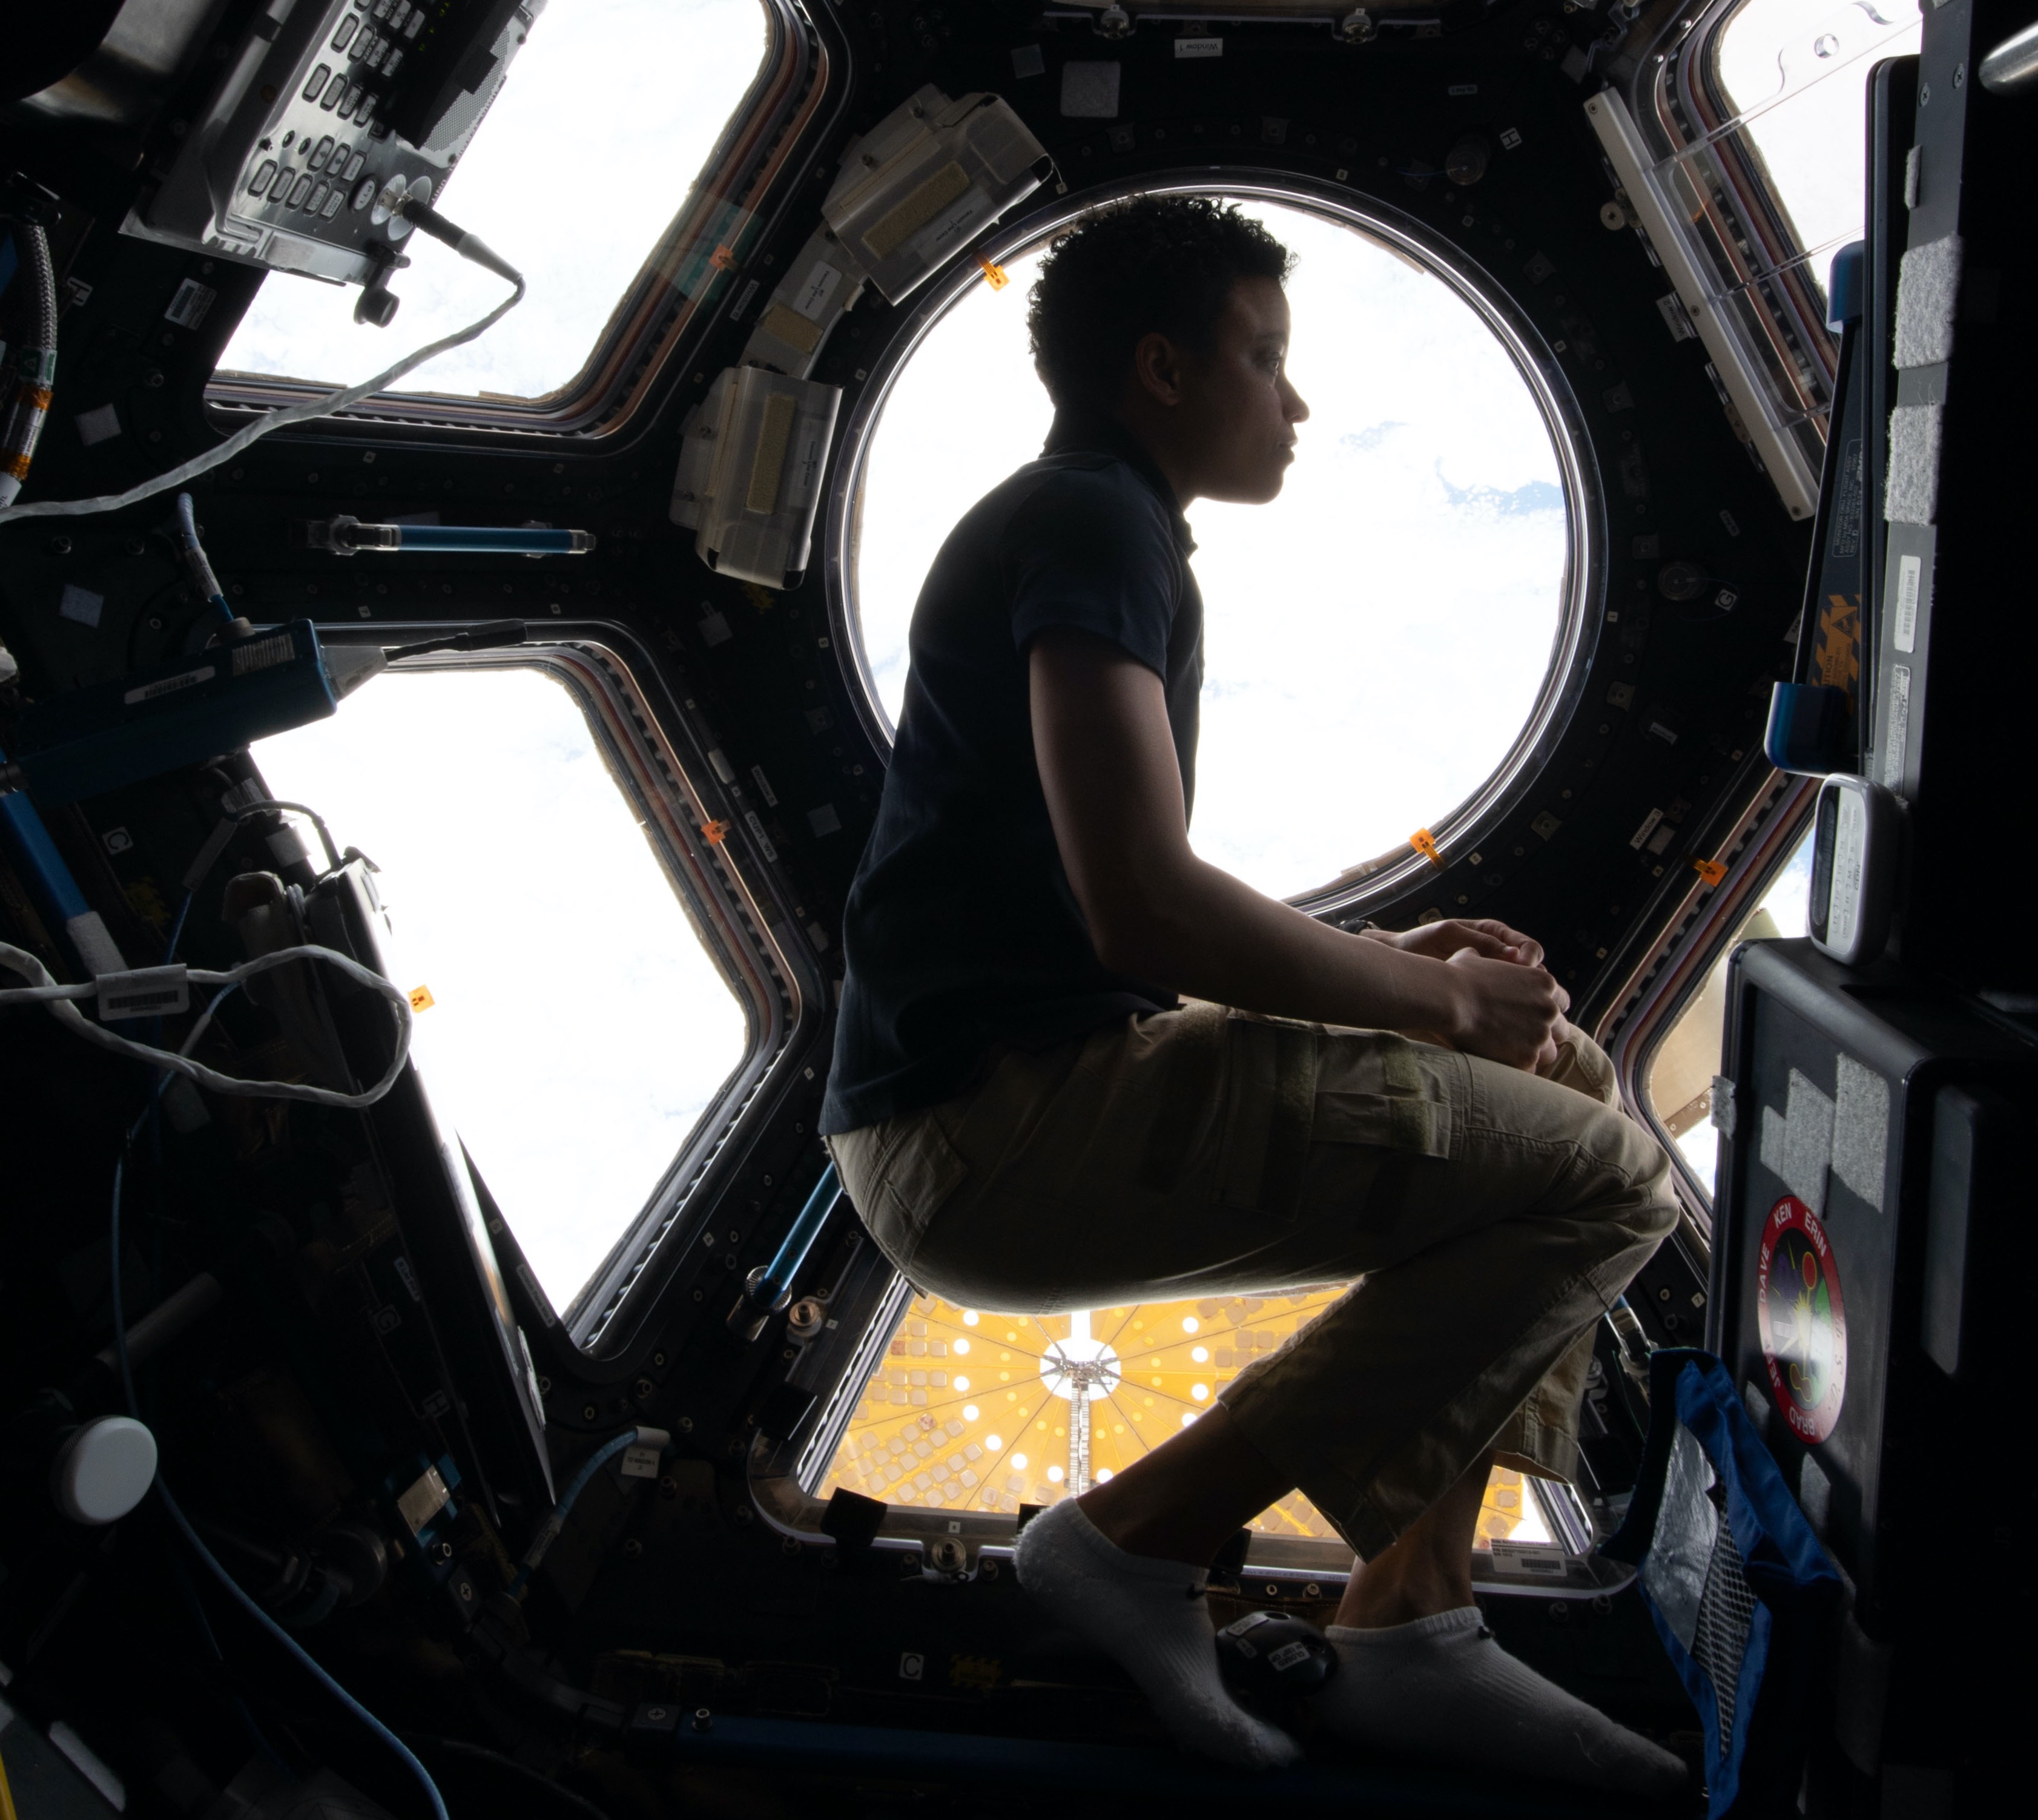 NASA astronaut Jessica Watkins floats in the dome of the International Space Station in this photo shared by NASA on May 9, 2022.